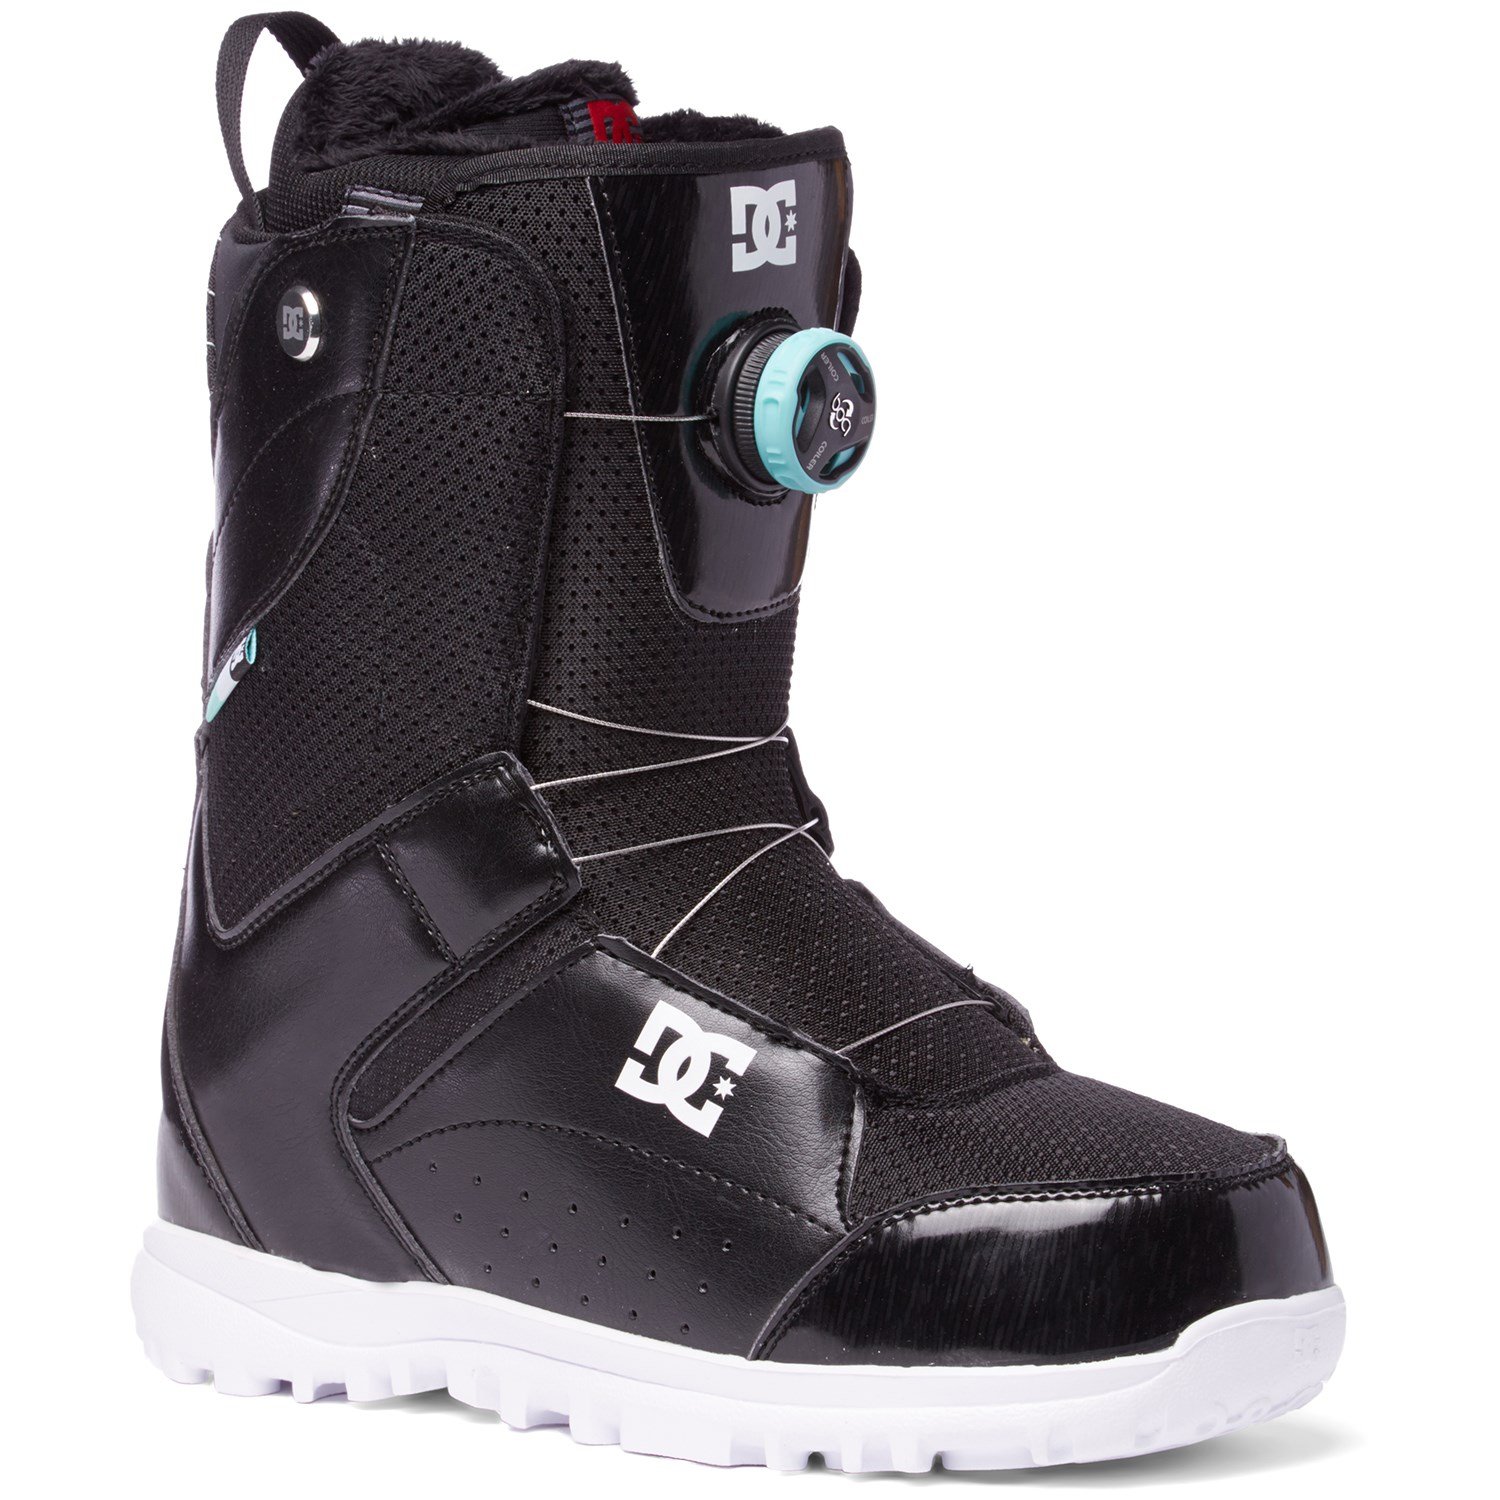 dc search womens snowboard boots